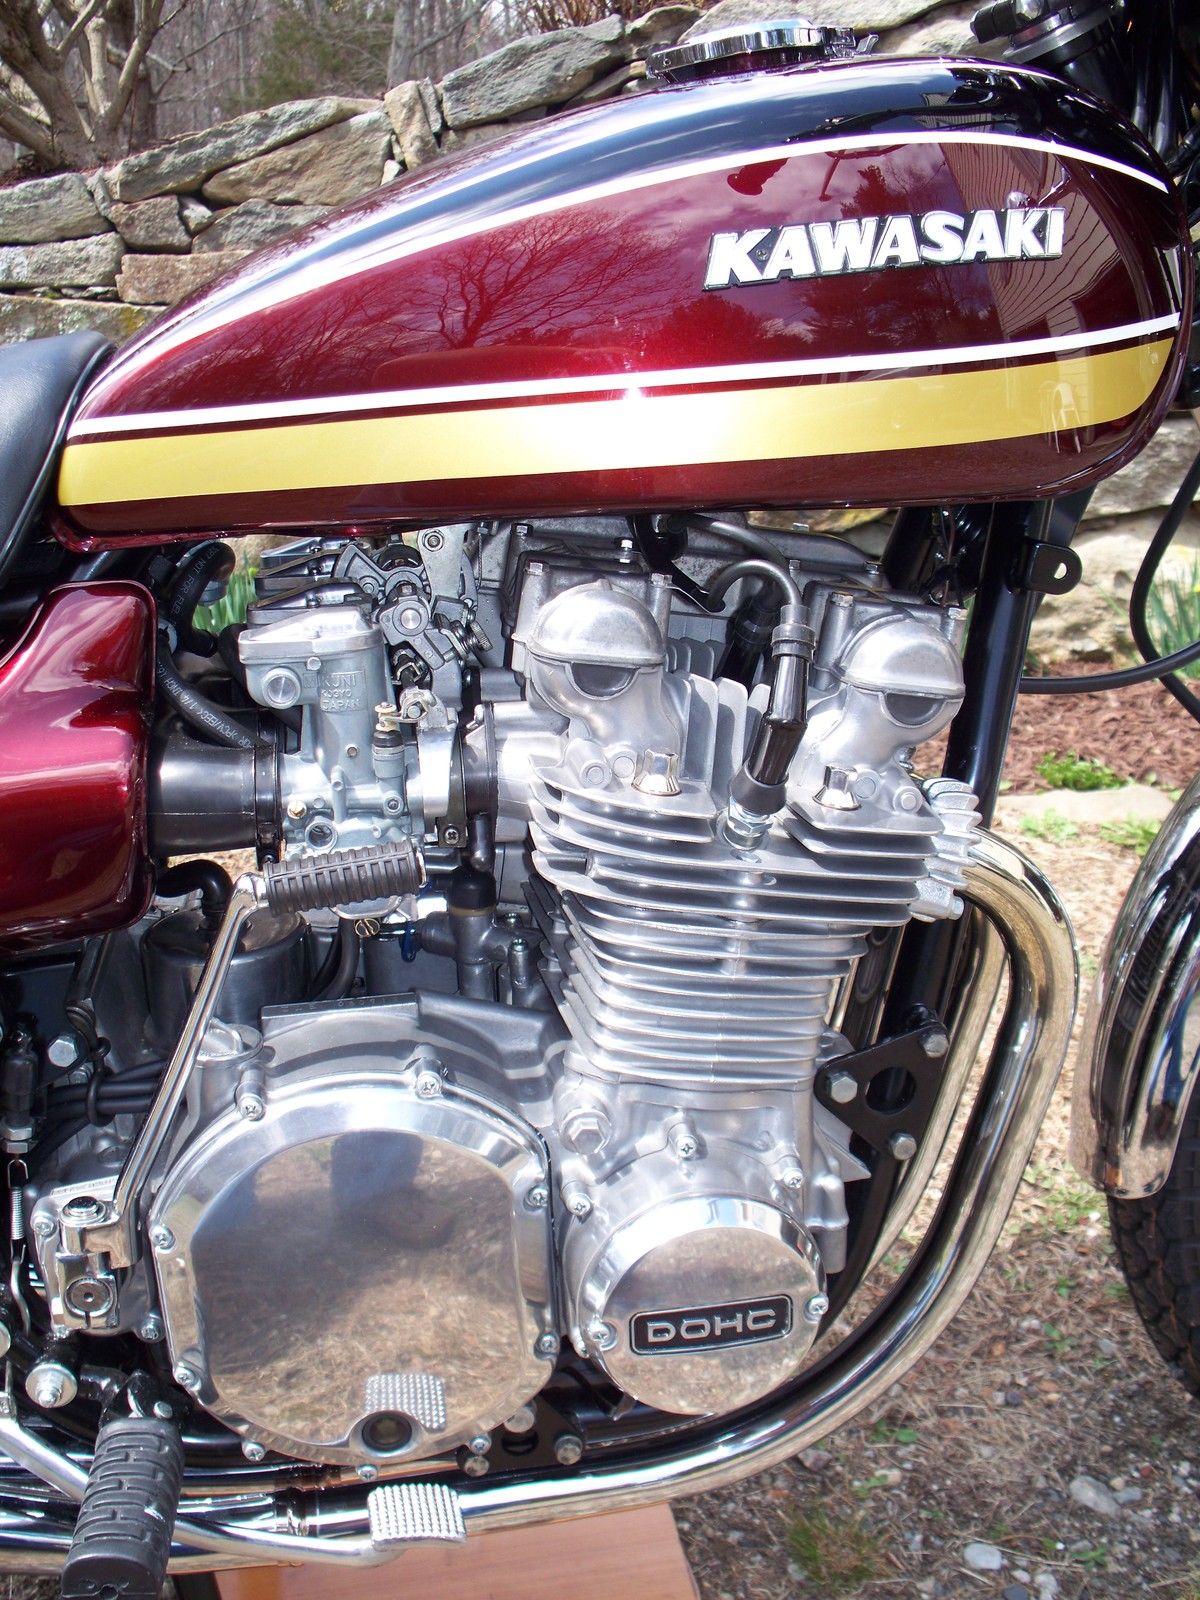 Kawasaki Z1 - 1975 - Kick Start, Clutch Cover, Points Cover, Cam Cover and Airbox.